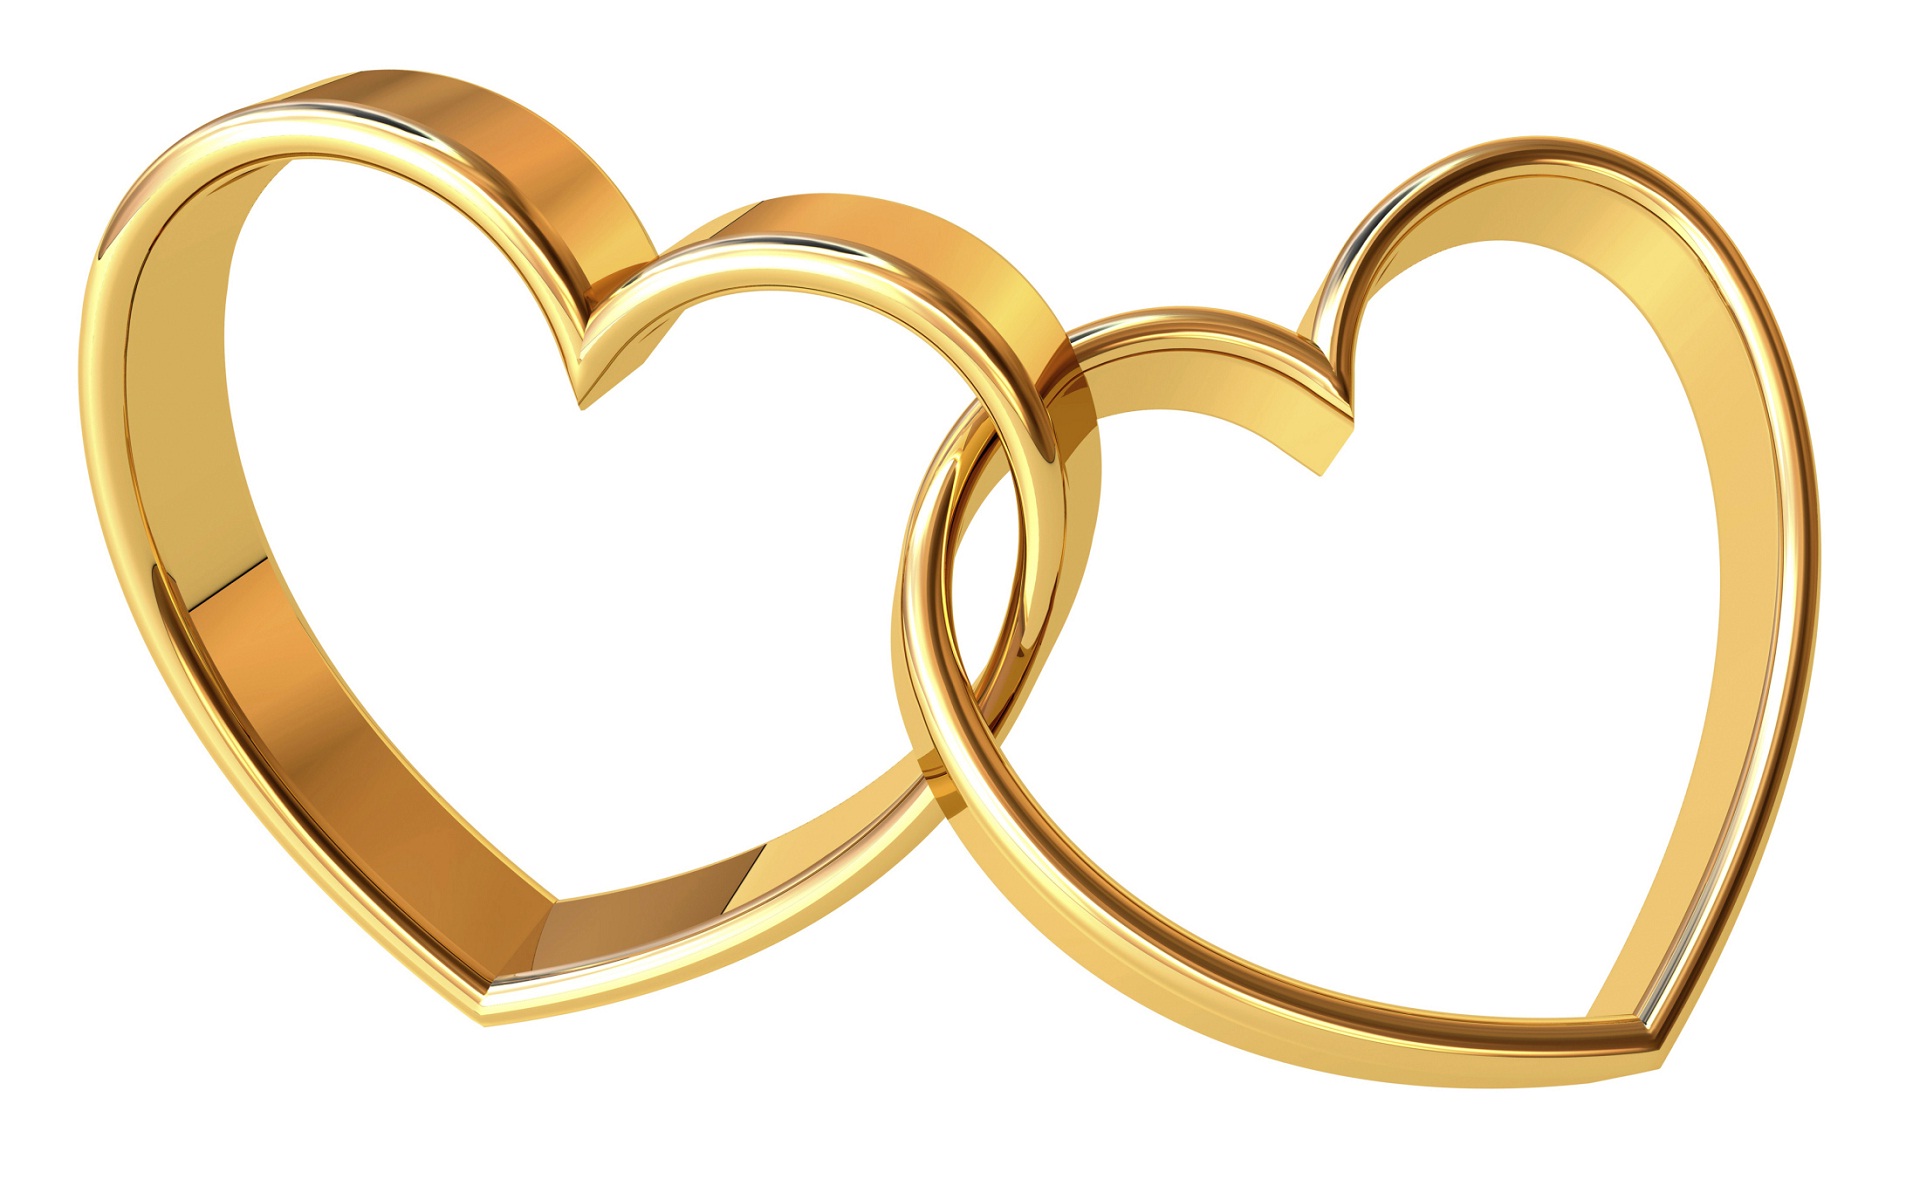 Gold Rings Heart Shape Happy Anniversary Wallpapers - Dove With Wedding Rings - HD Wallpaper 